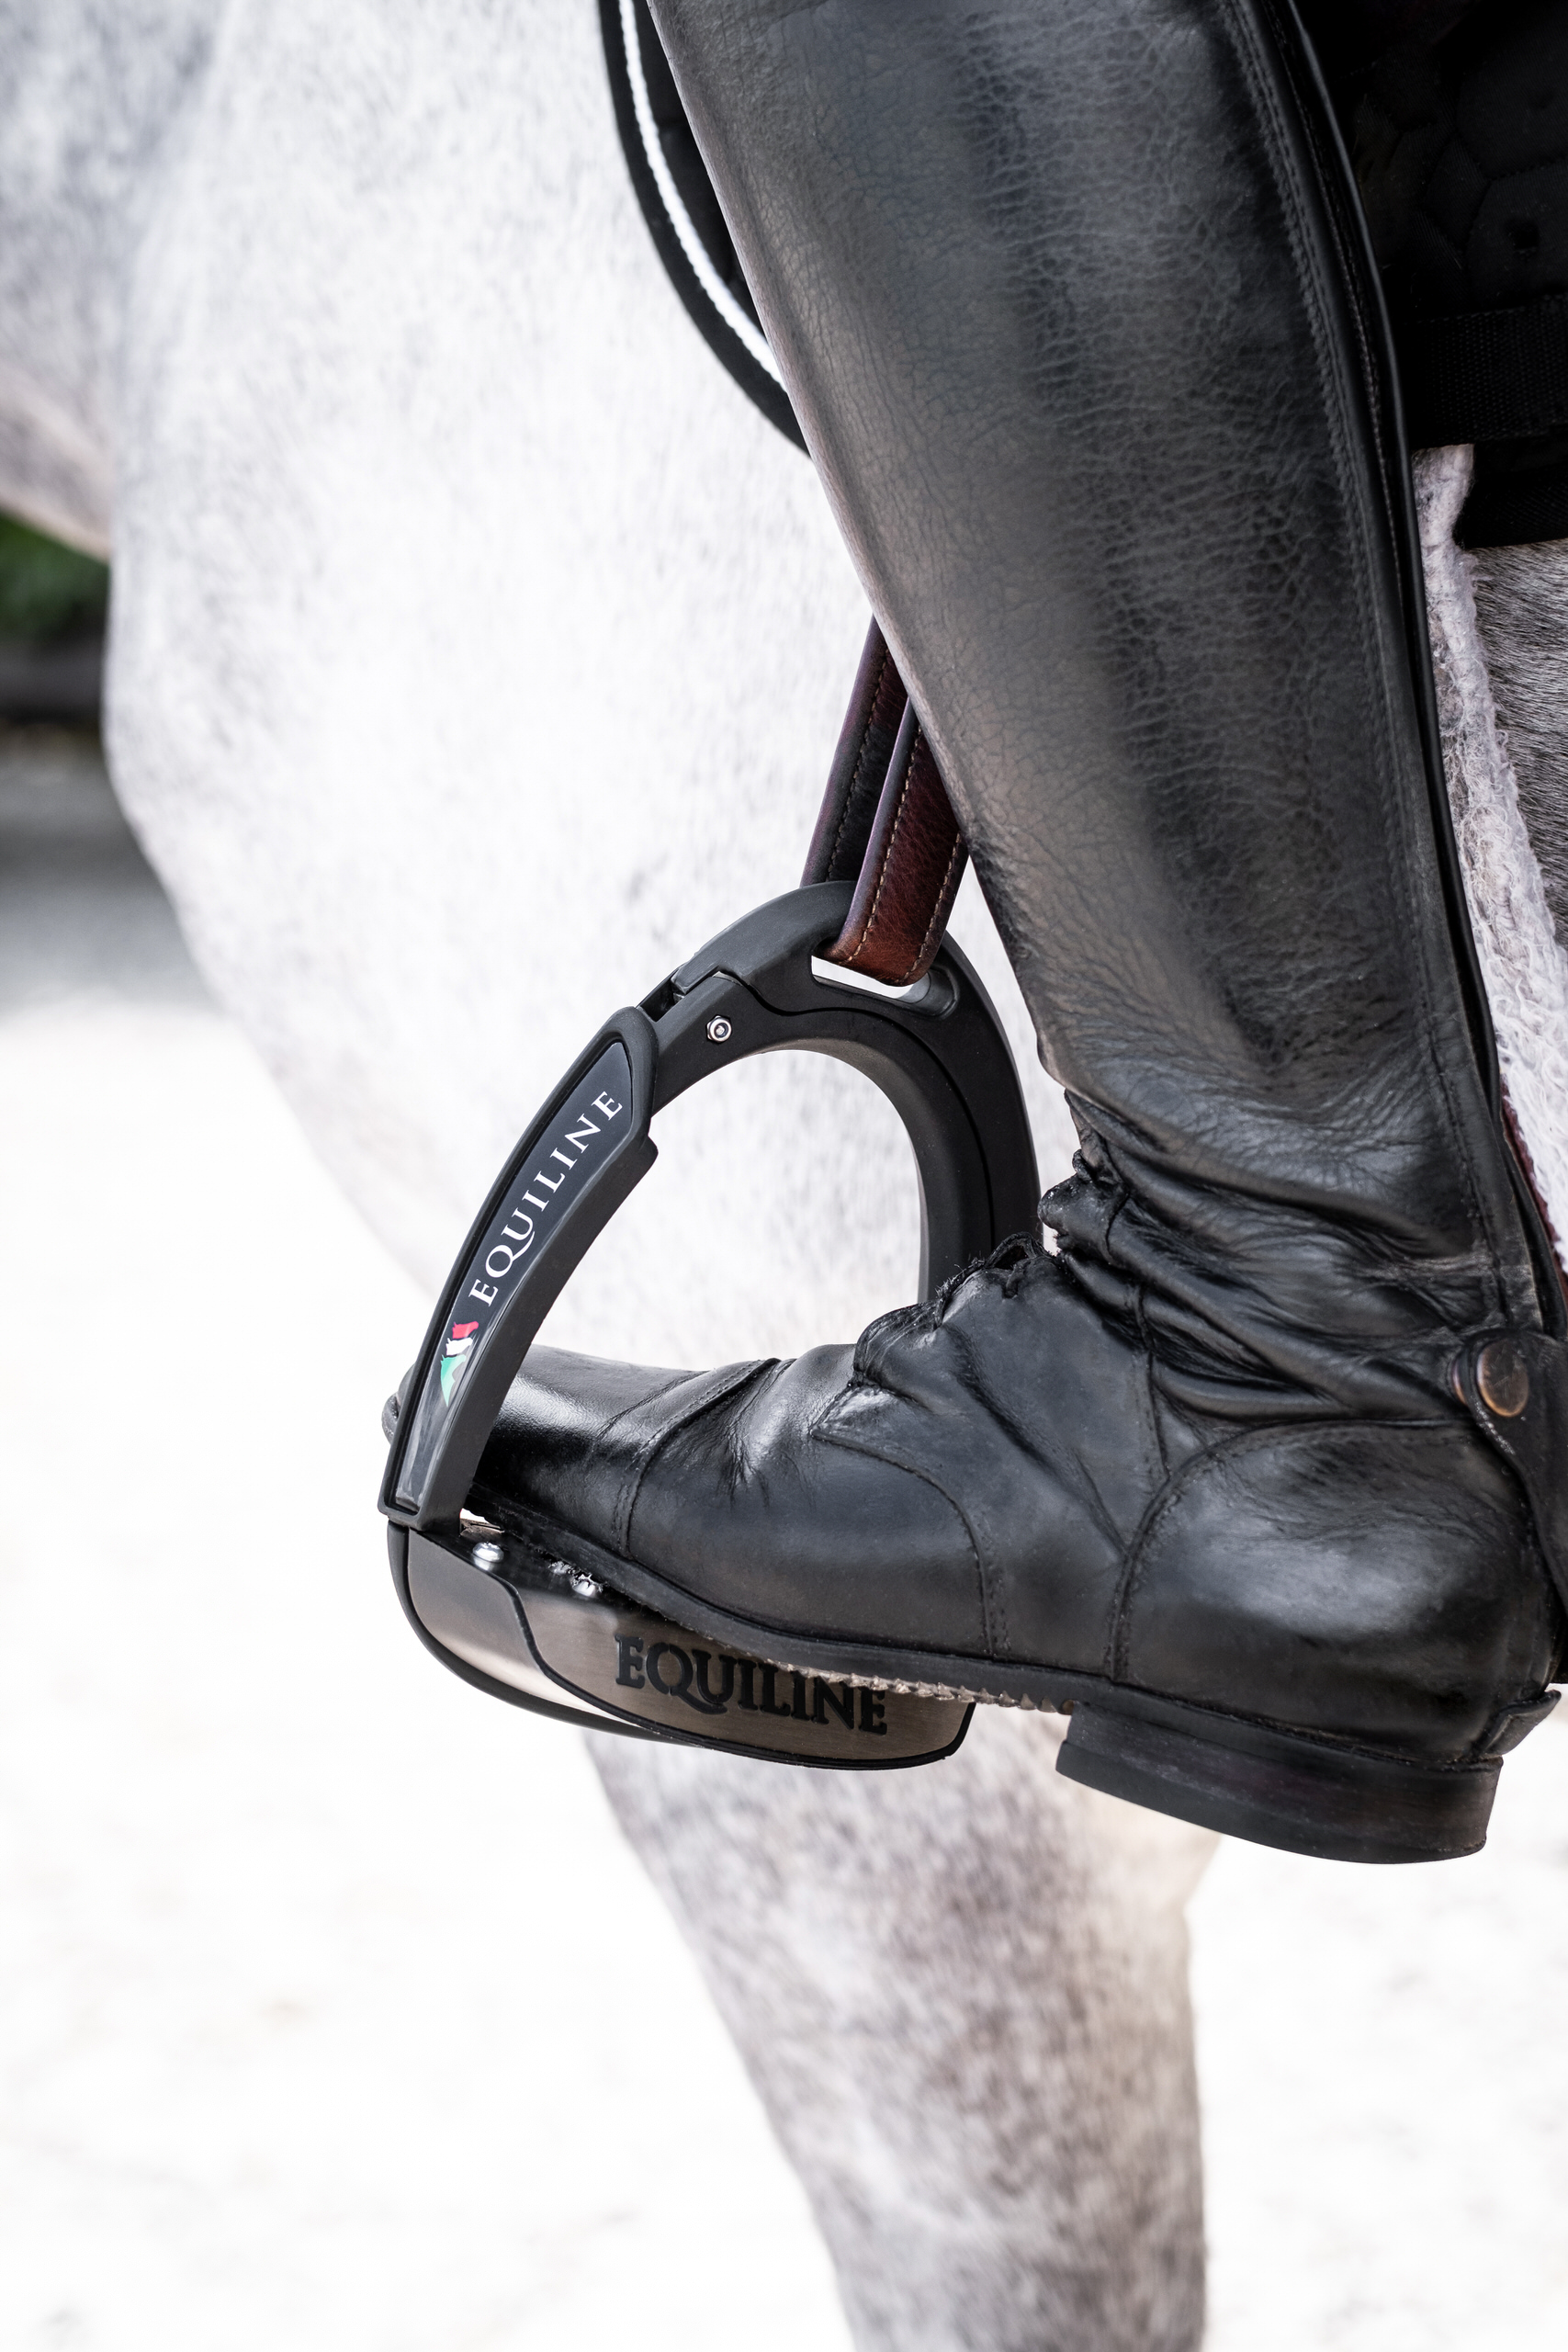 X-CEL STIRRUPS - with boot - white horse